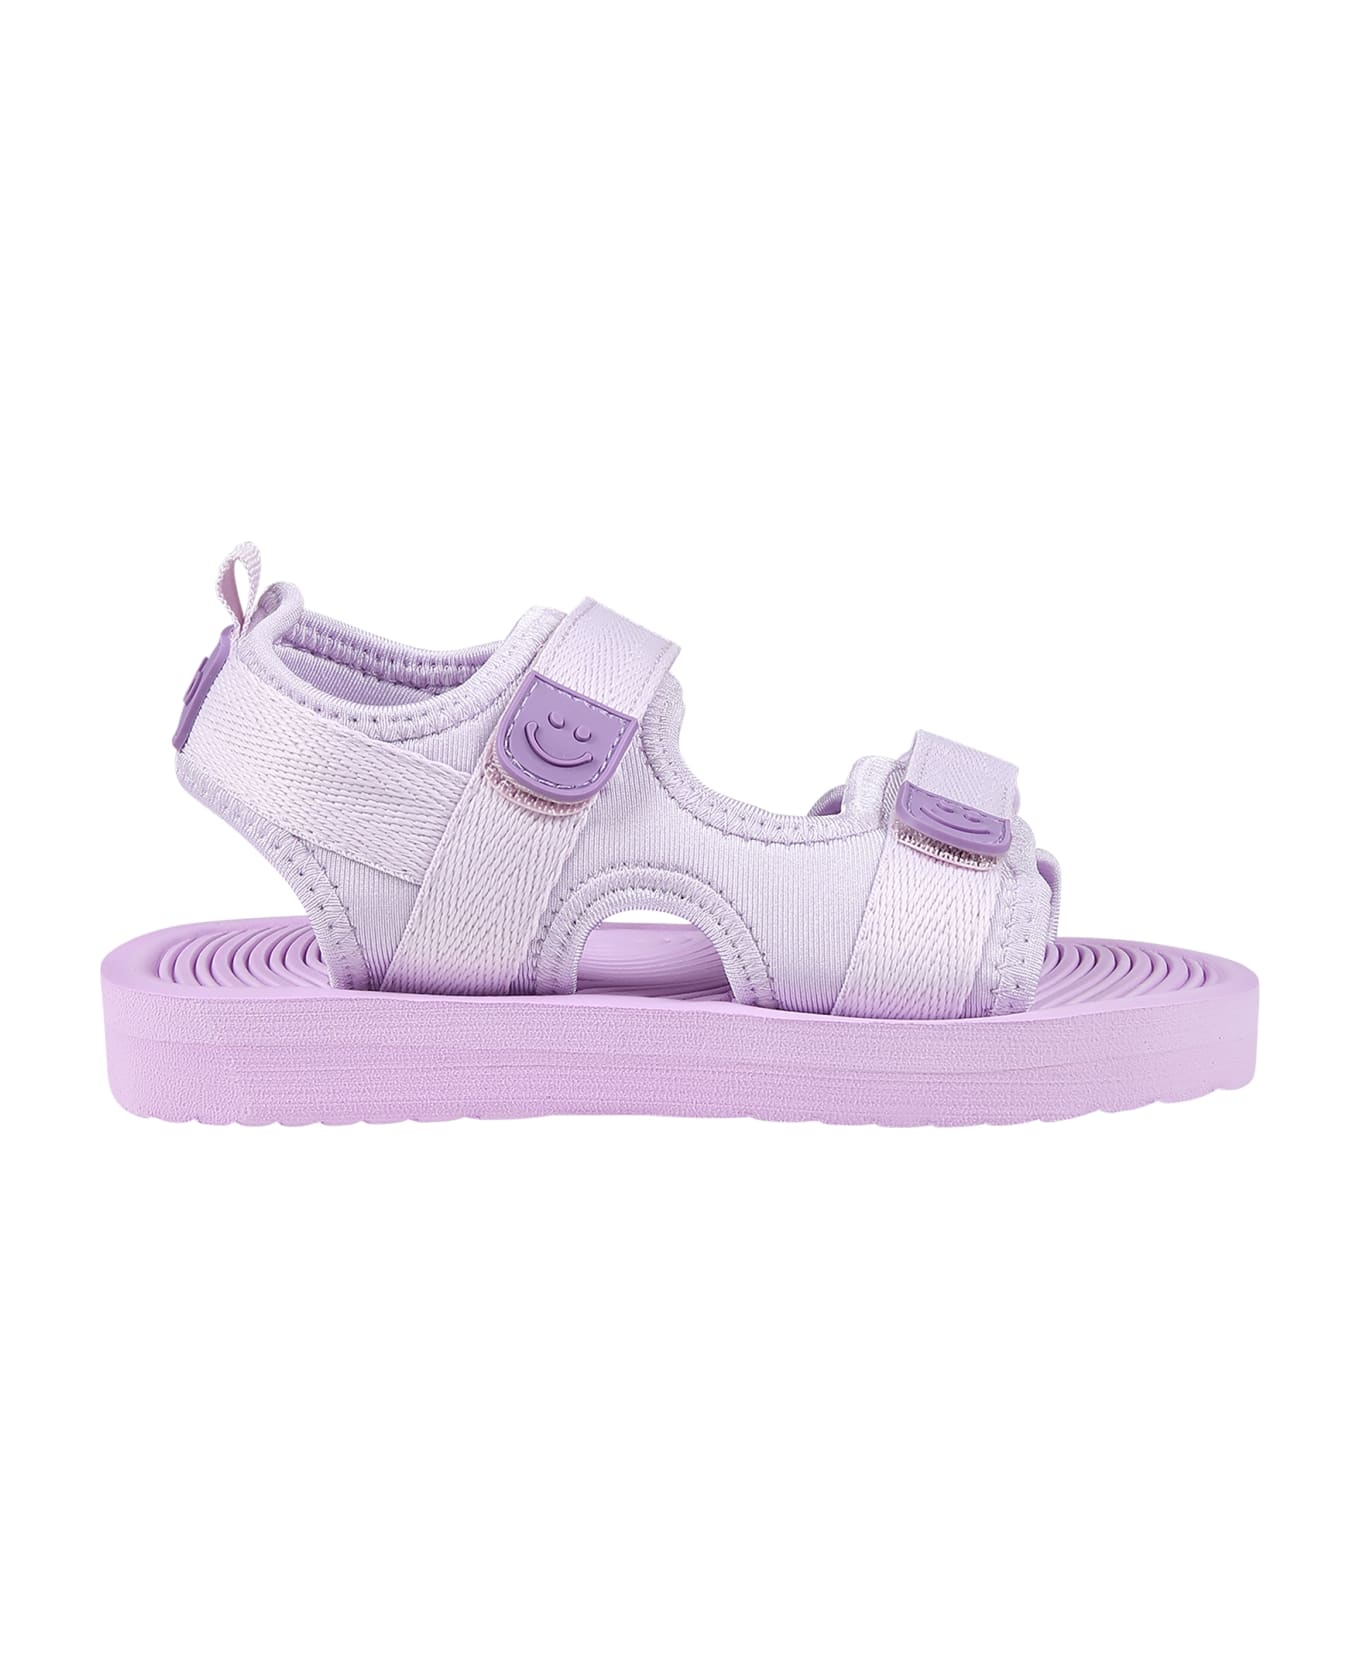 Molo Purple Sandals For Girl With Logo - Violet シューズ